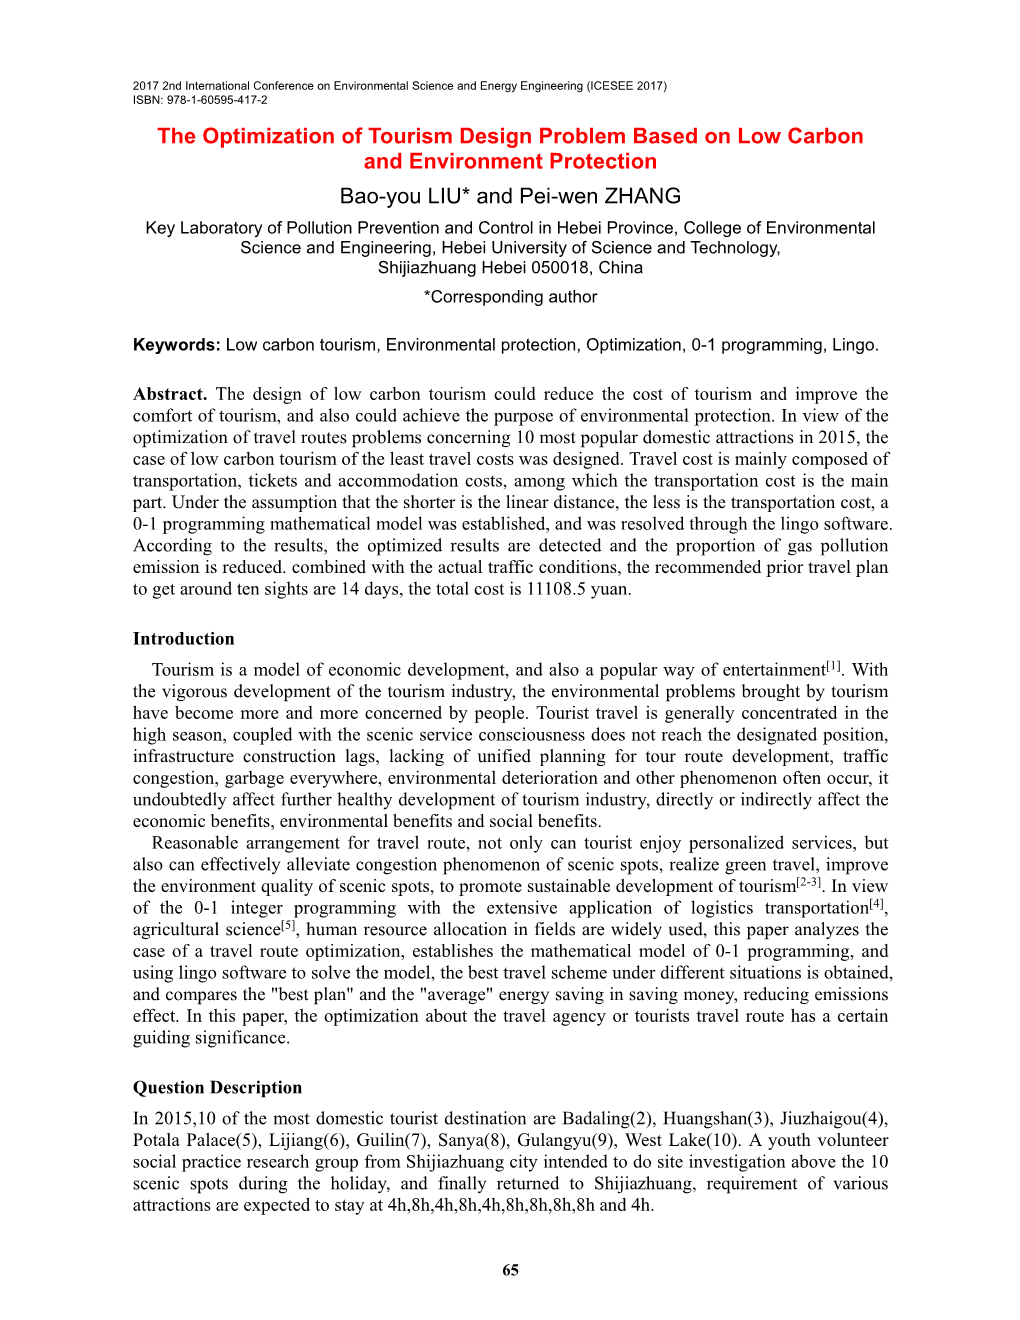 The Optimization of Tourism Design Problem Based on Low Carbon And